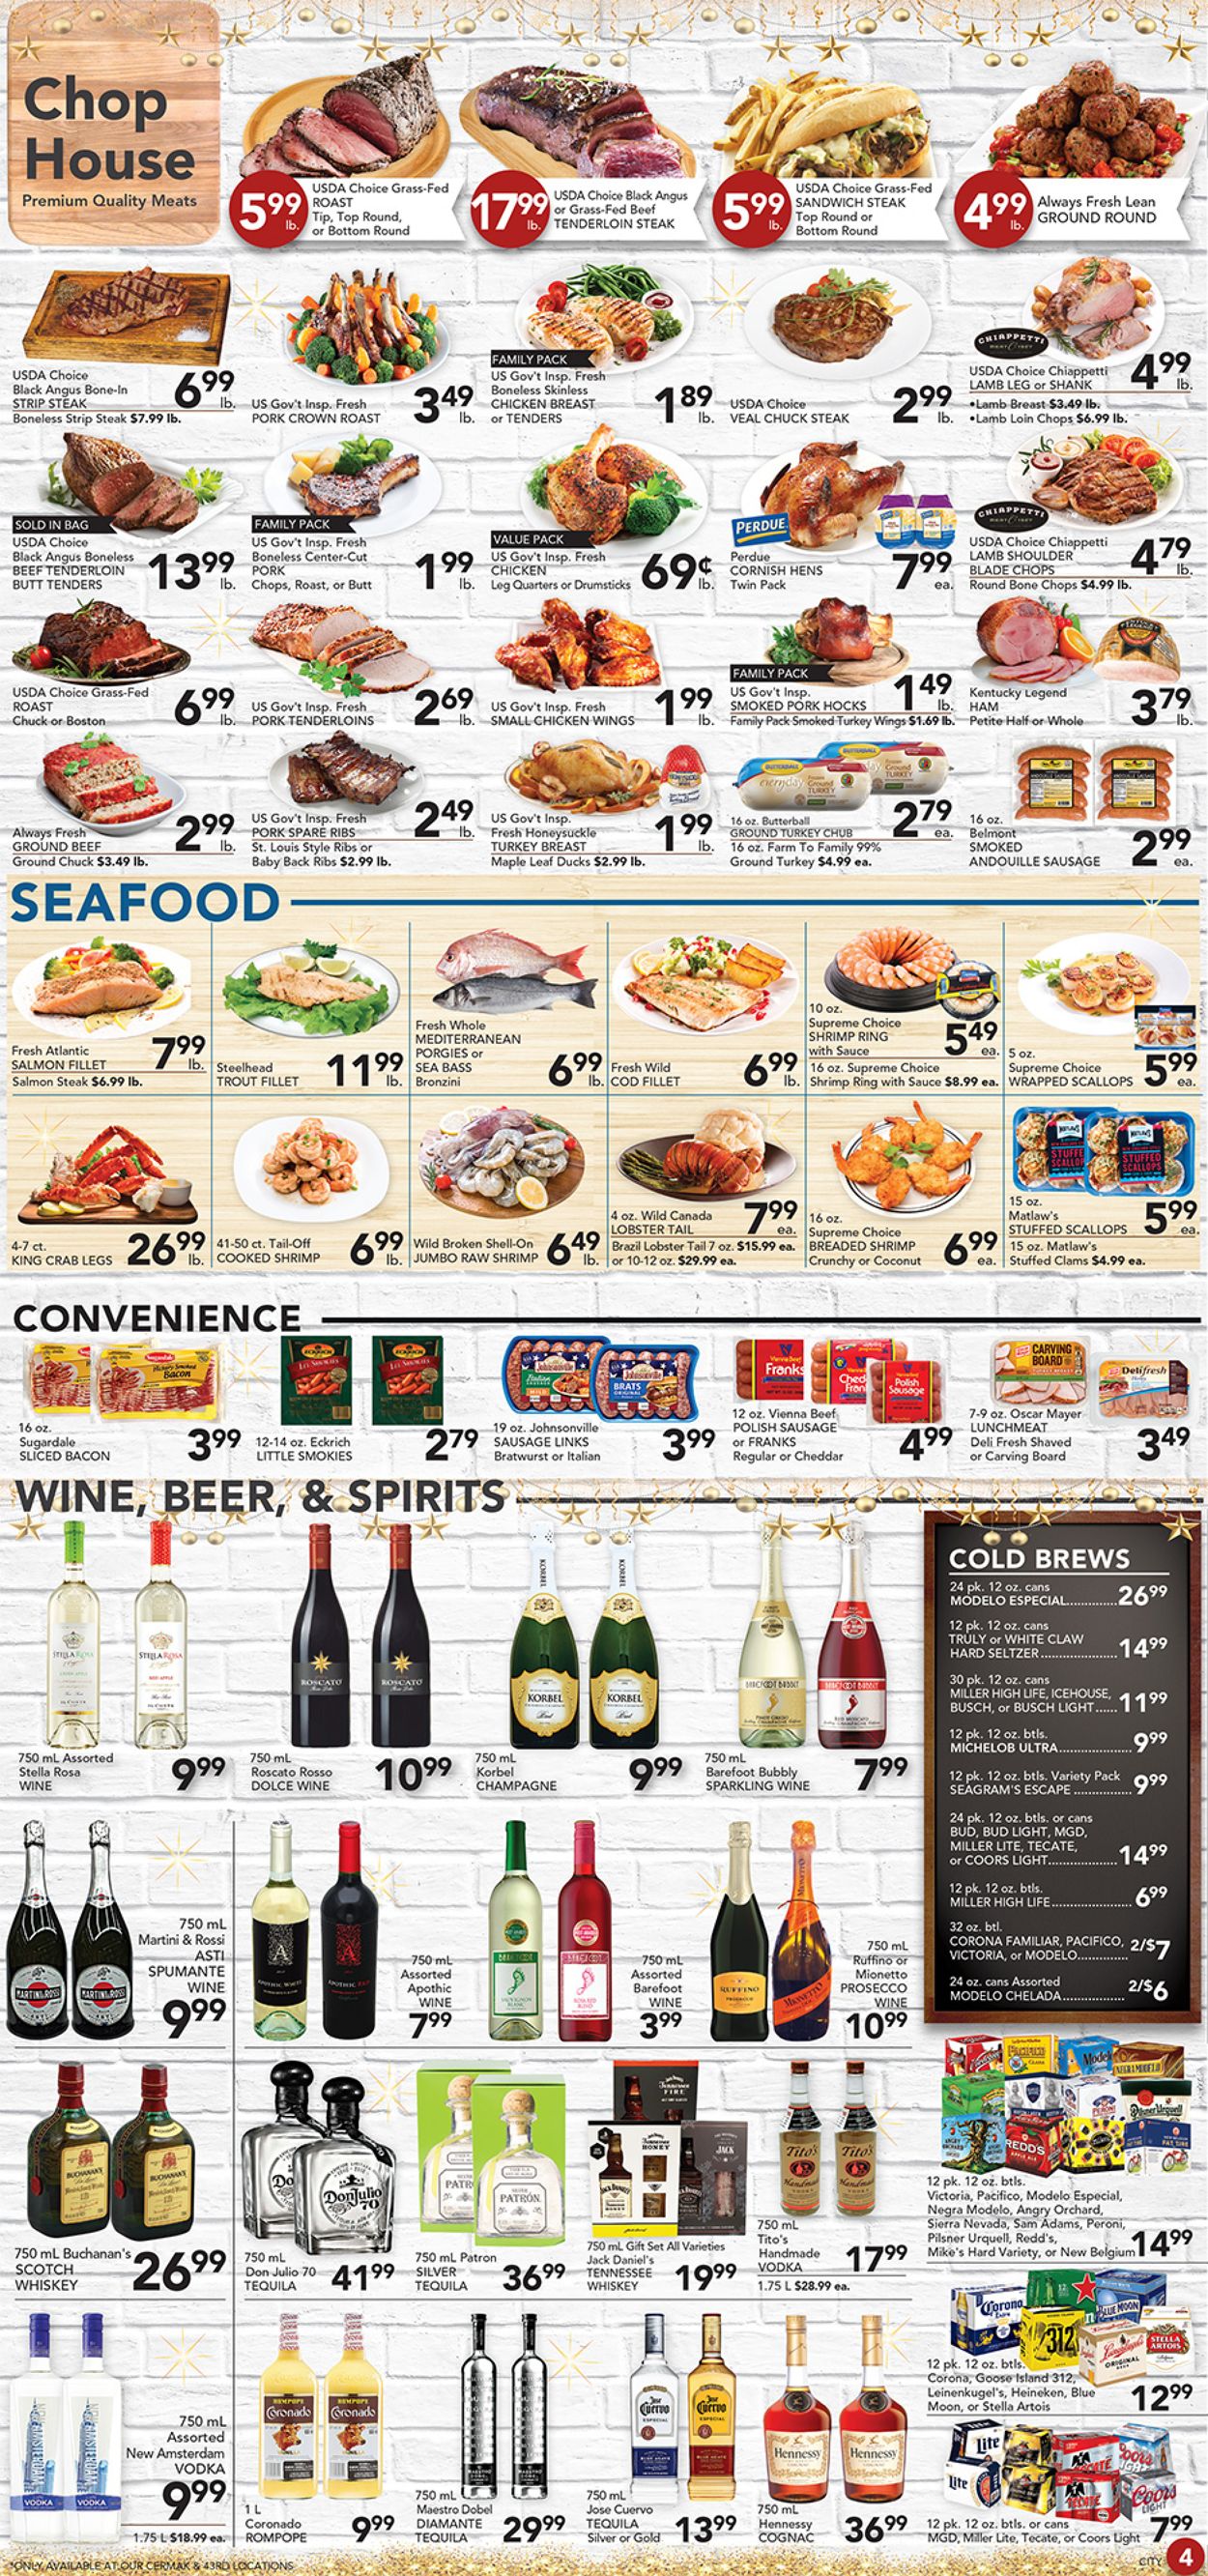 Pete's Fresh Market - New Year's Ad 2019/2020 Weekly Ad Circular - valid 12/26-12/31/2019 (Page 4)